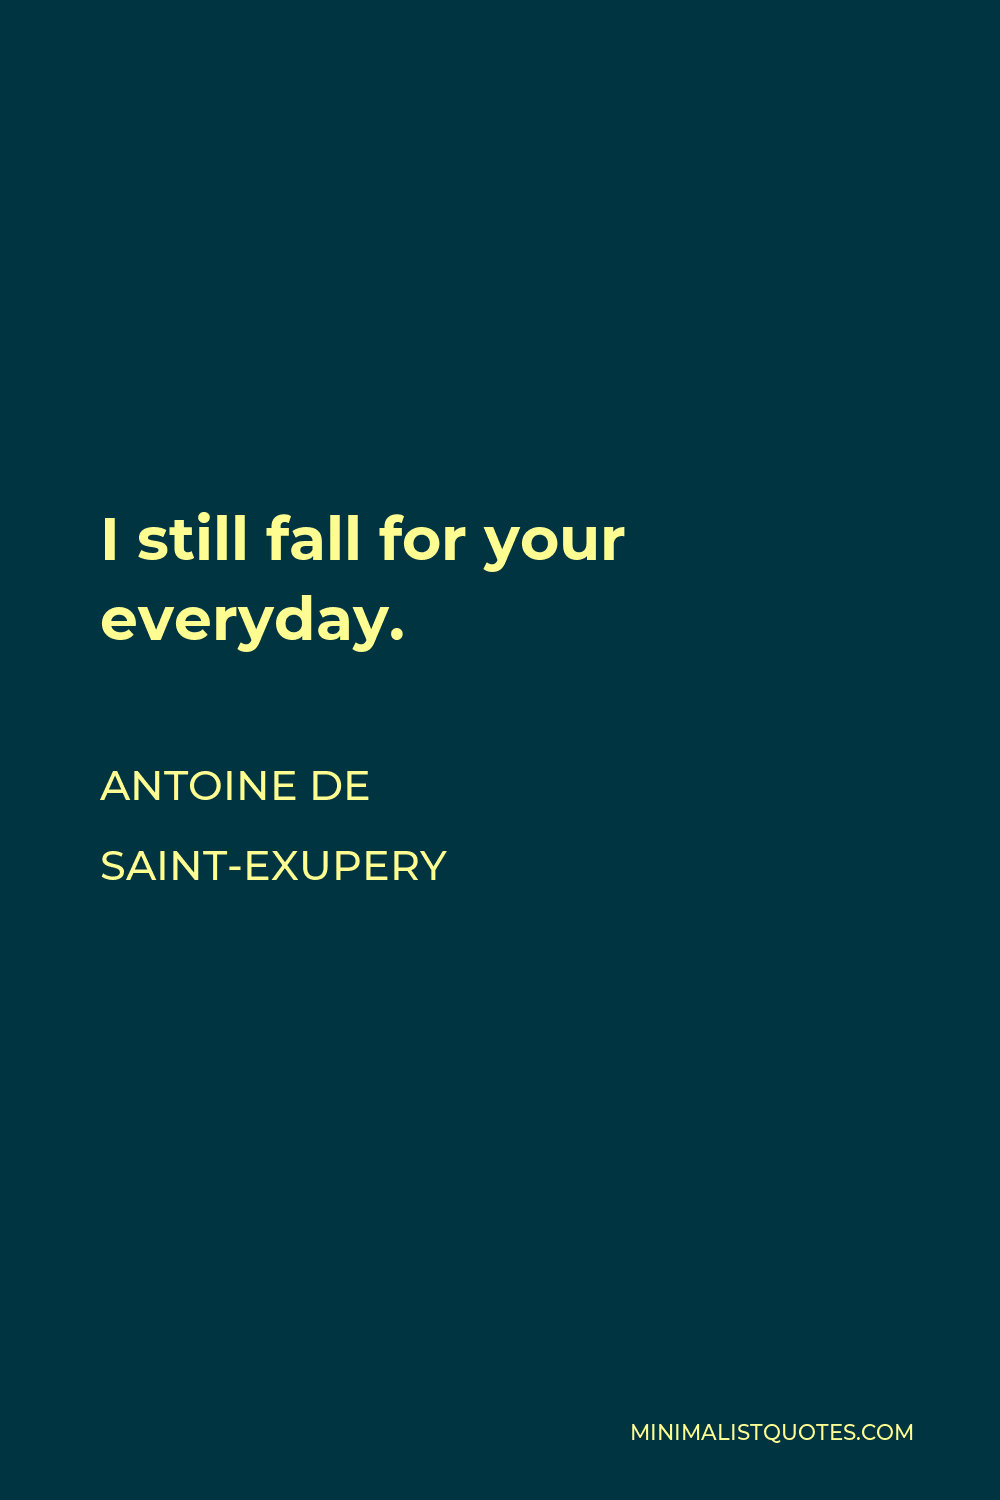 Antoine de Saint-Exupery Quote - I still fall for your everyday.